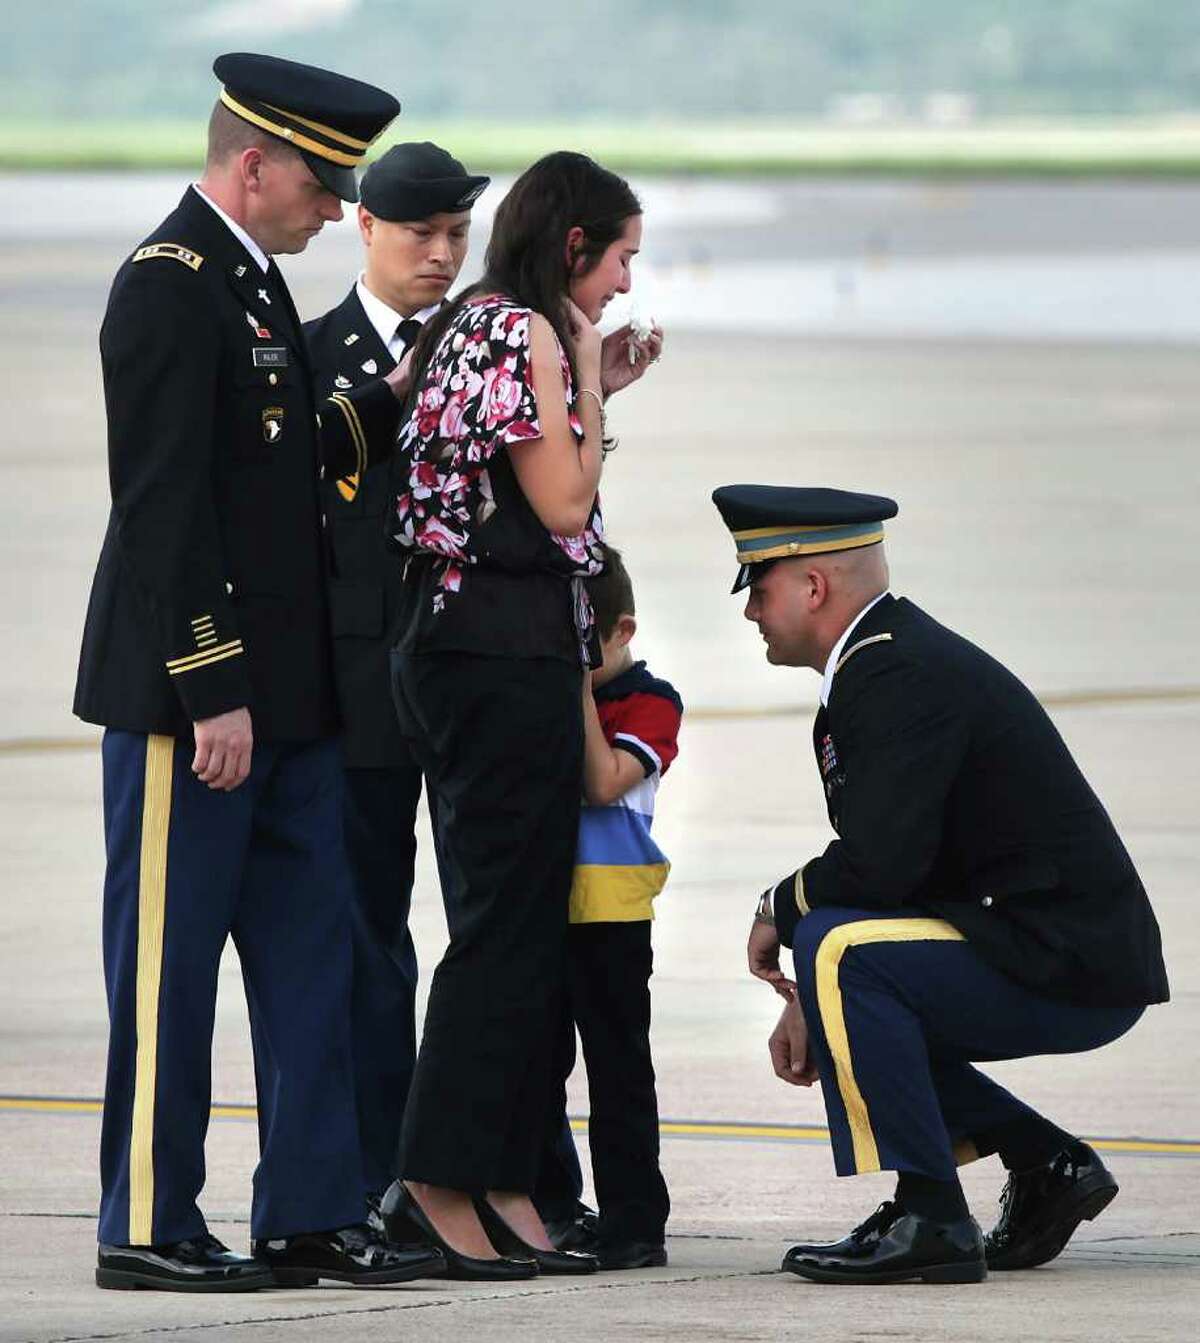 An unidentified U.S. Army officer, right, consoles Dean Ray, 5, hiding behind his mother Shannon Ray's leg, after the remains of Army 1st Lt. Clovis T. Ray, Dean's father, arrived at the Kelly Field Flightline. Ray died March 15th in the Kunar province in Afghanistan. Friday, March 30, 2012. The memorial service for Ray is Saturday at the Live Oak County Coliseum between Three Rivers and George West. Three Rivers Mayor James Liska recalls Army Lt. Clovis Ray as a leader even when they both played on a high school football team that made the state playoffs two years in a row. "He was the guy that it didn't matter who you were, what walk of life you came from, he was just your friend," said Liska. Ray was elected class favorite two years in a row while becoming an honors student. "Everybody just loved him, " Liska said. Bob Owen/San Antonio Express-News.